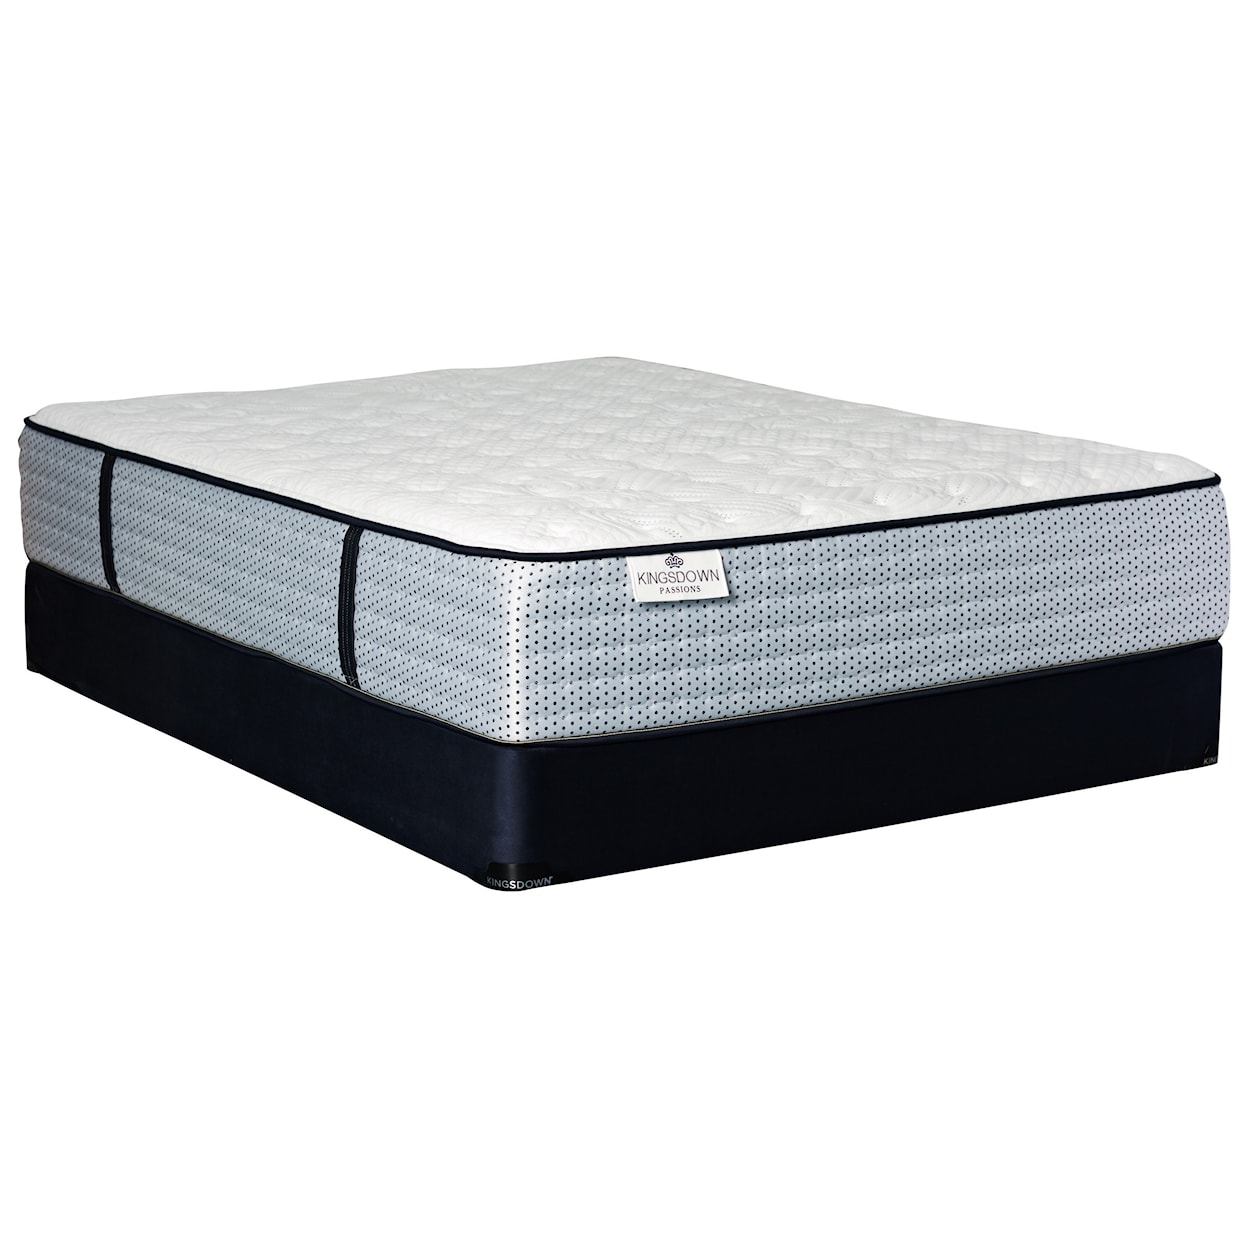 Kingsdown Passions Le Claire TT Twin Pocketed Coil Mattress Set